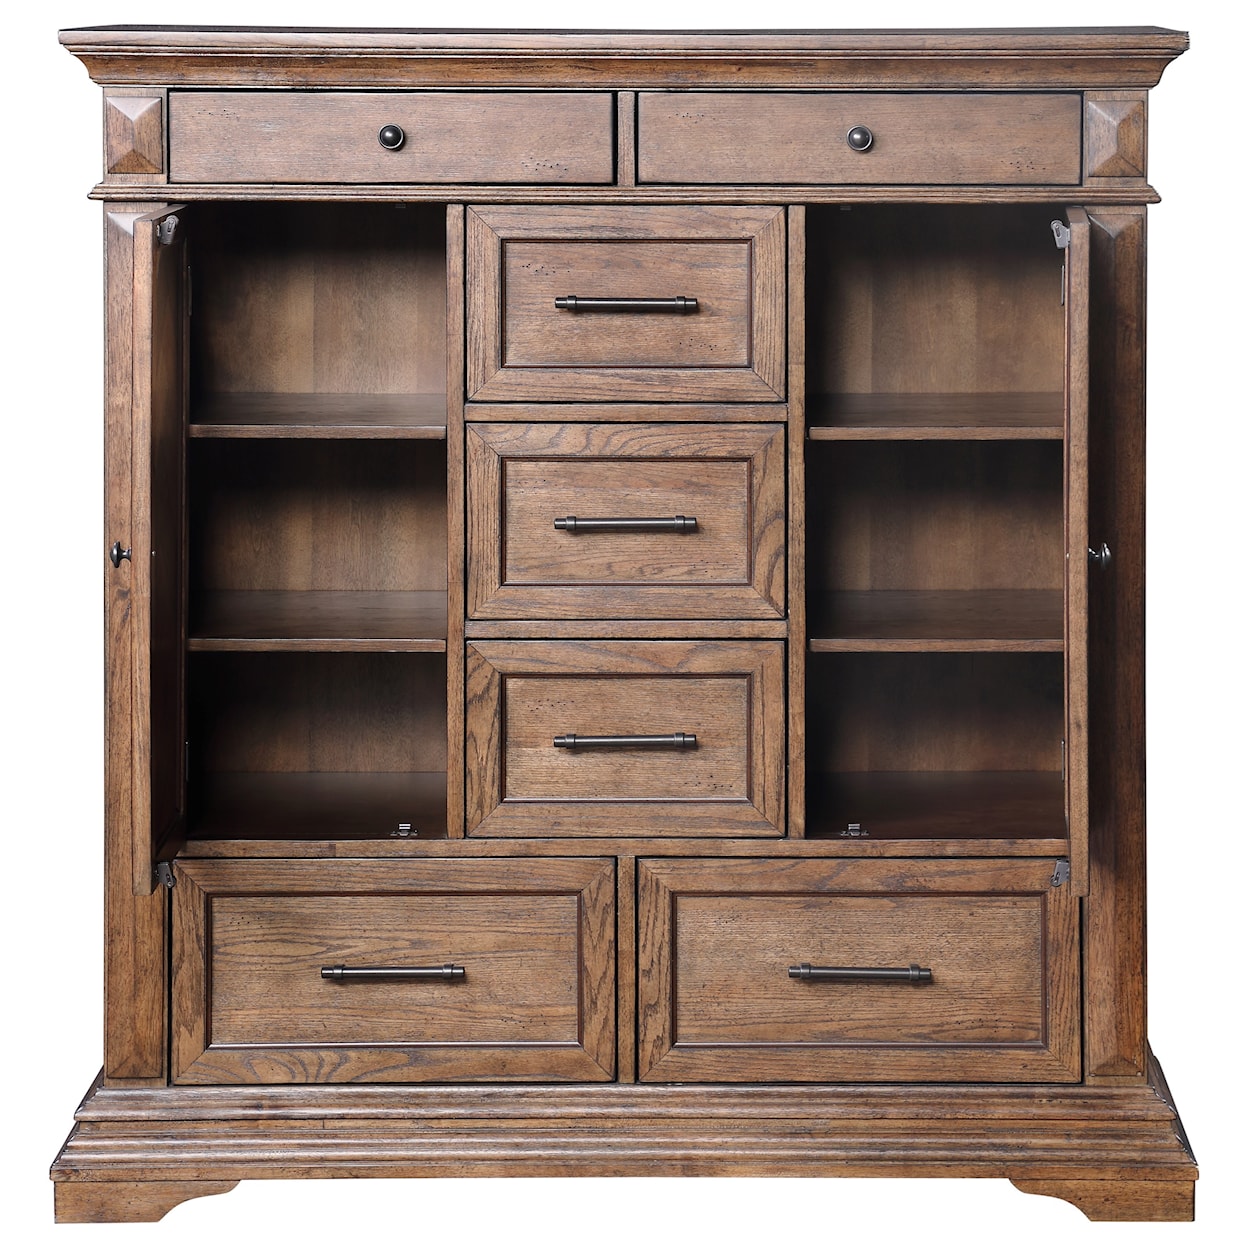 New Classic Furniture Mar Vista Chest with Doors